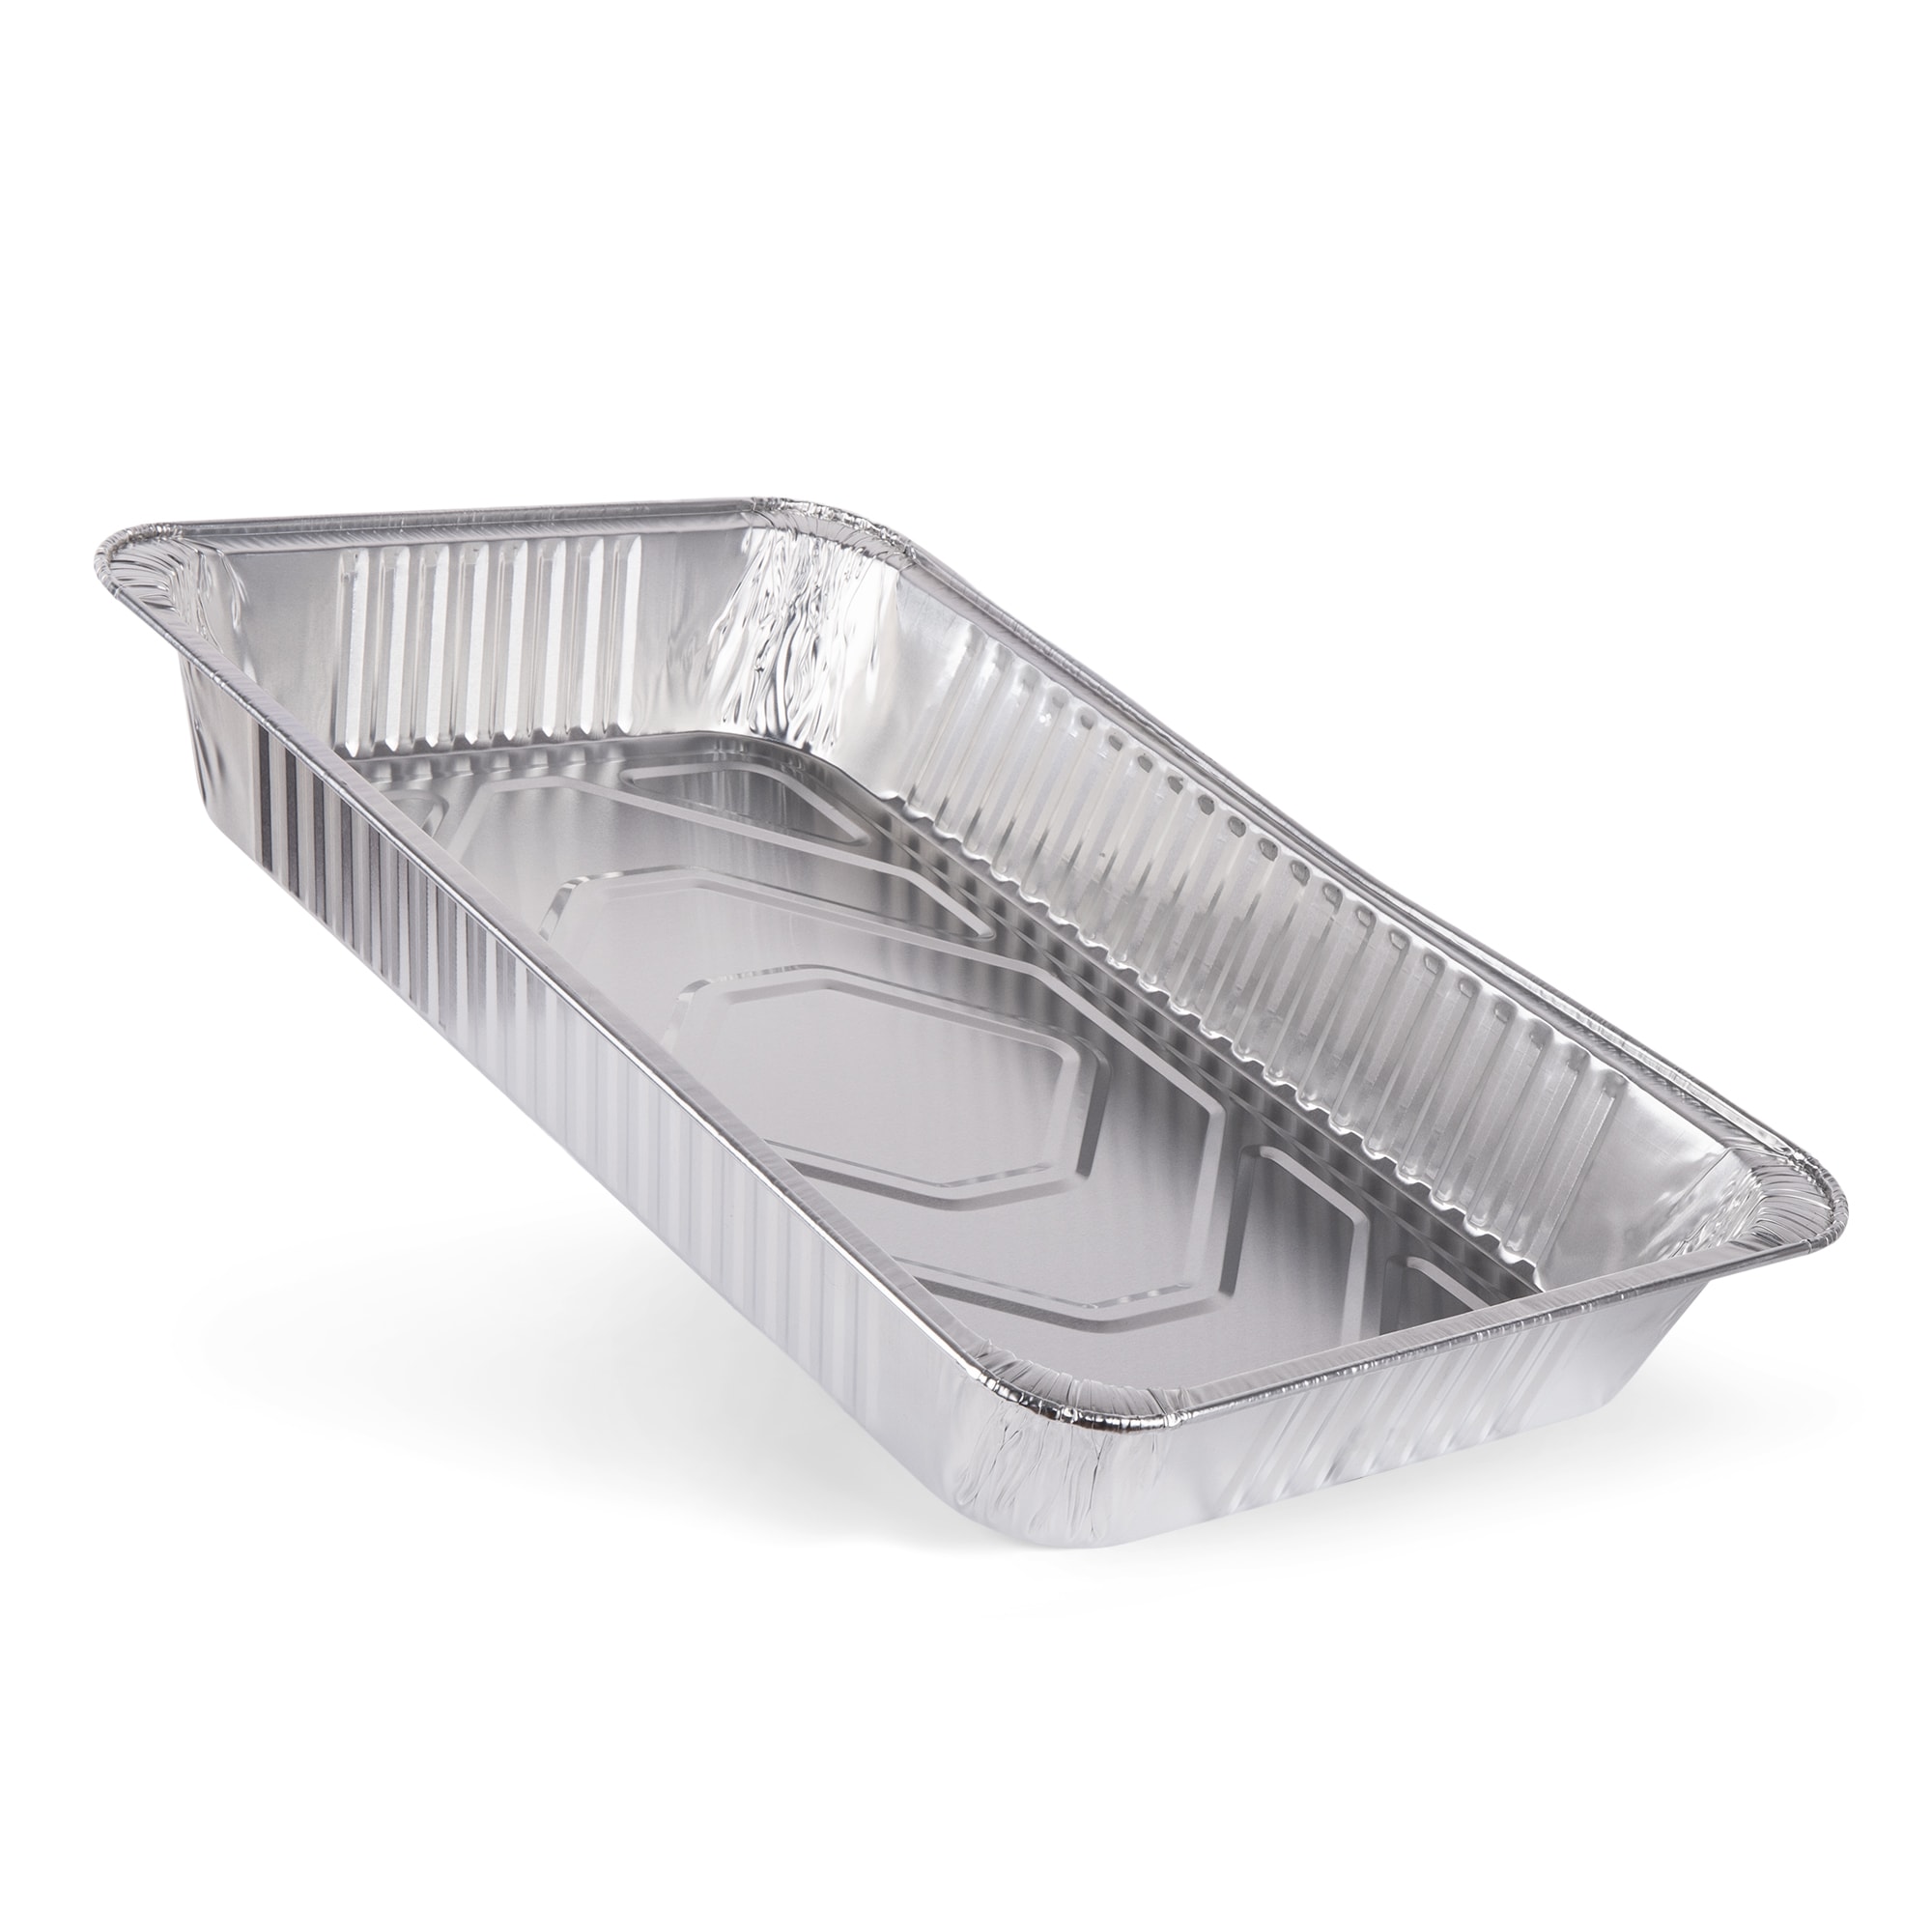 Aluminum Pans Trays 6.2x8.6 inch 25 Pack - Disposable Roasting